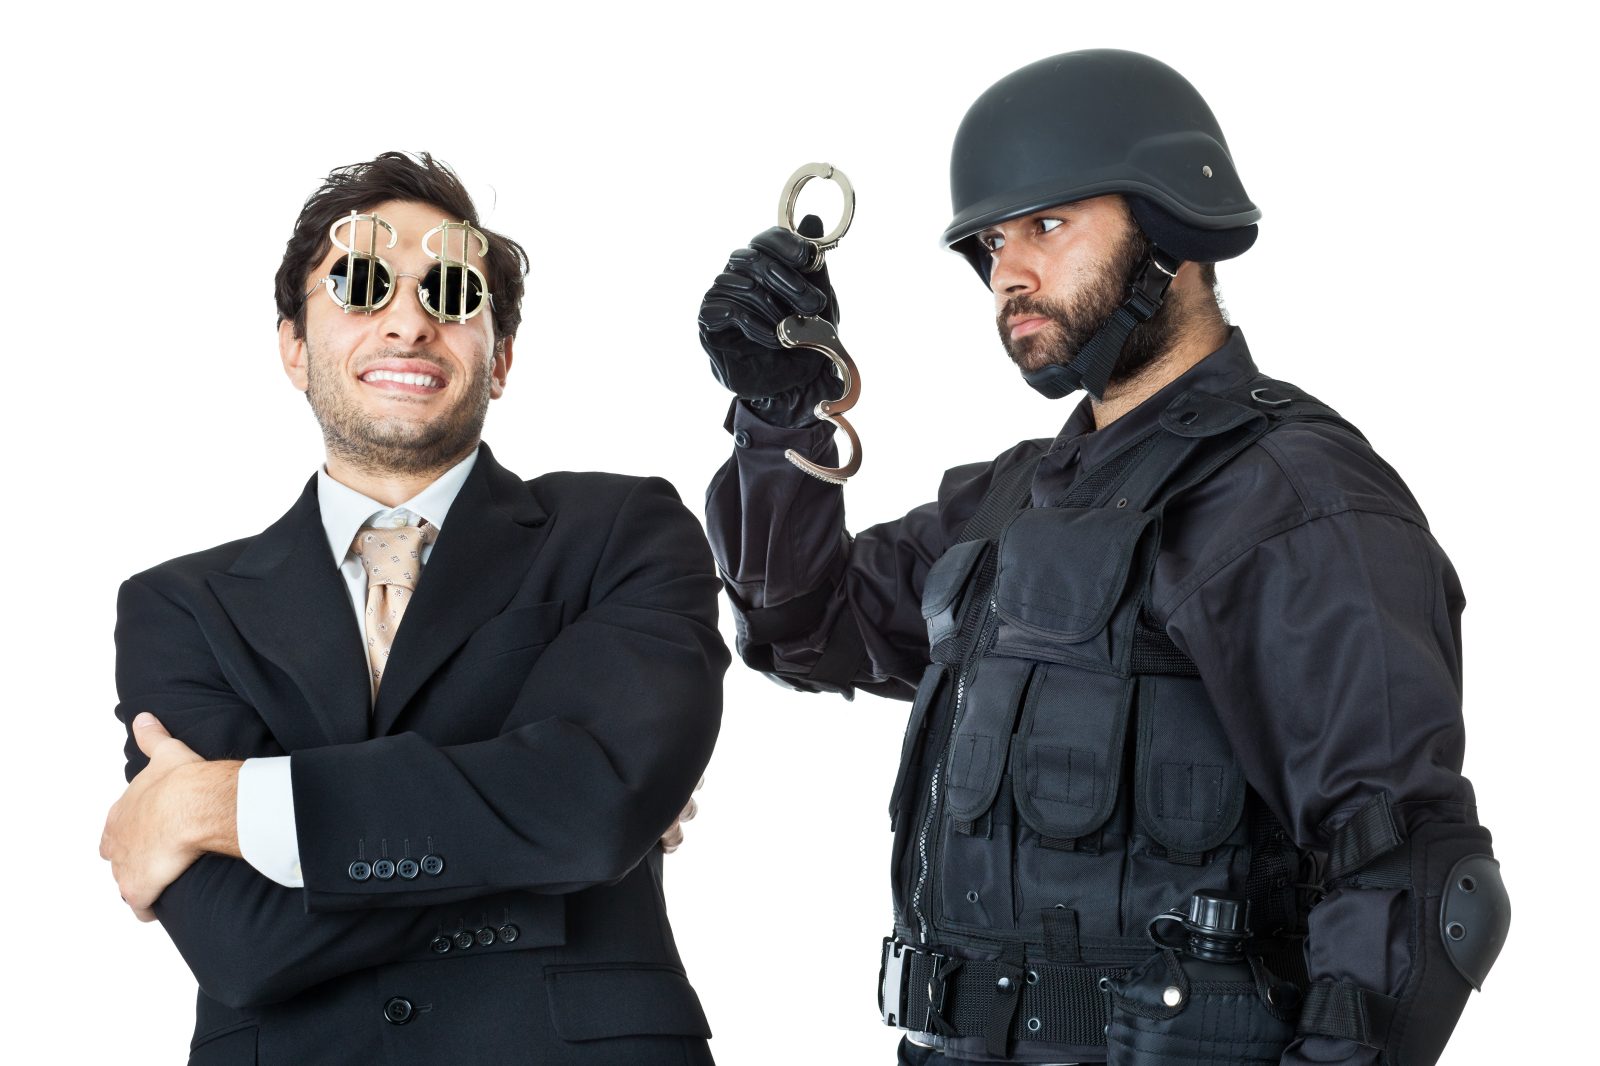 security guards need conflict resolution skills